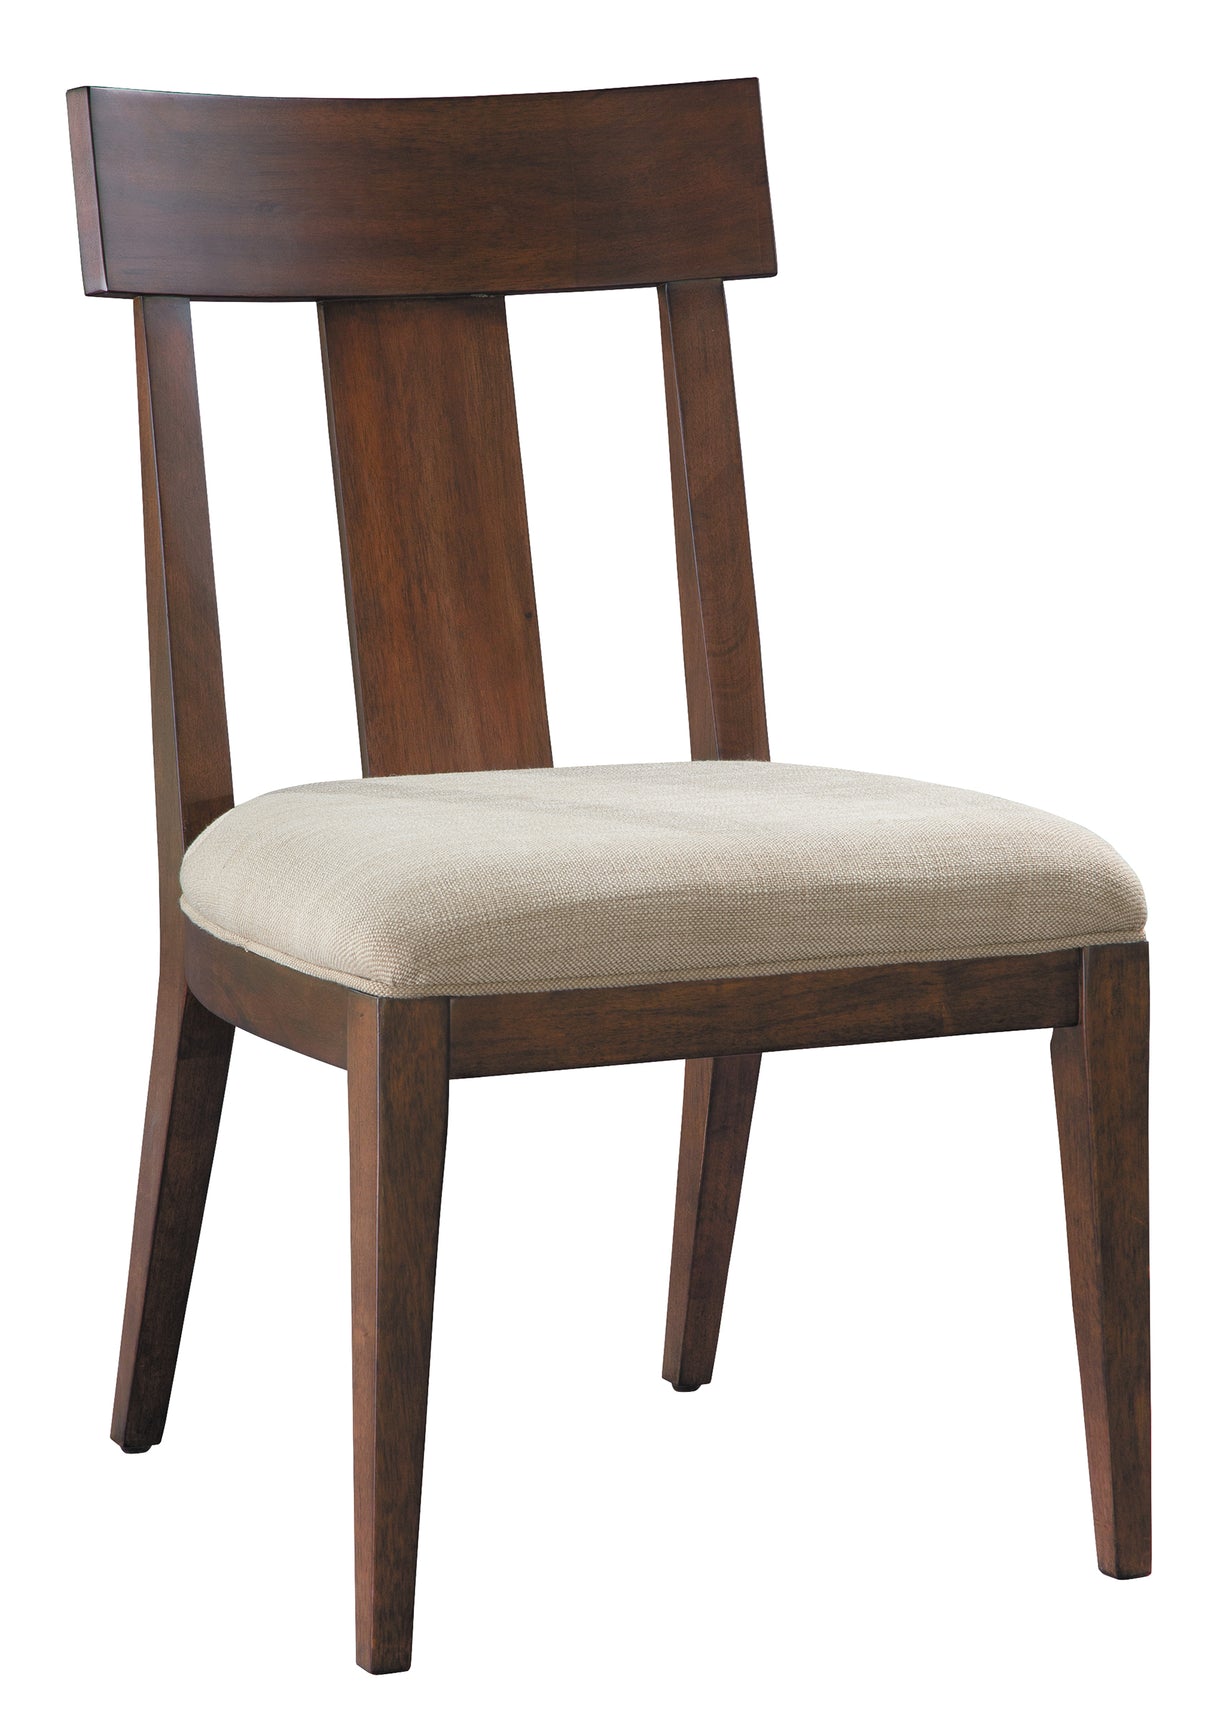 Hekman 24323 Monterey Point 21in. x 23.25in. x 38in. Dining Side Chair